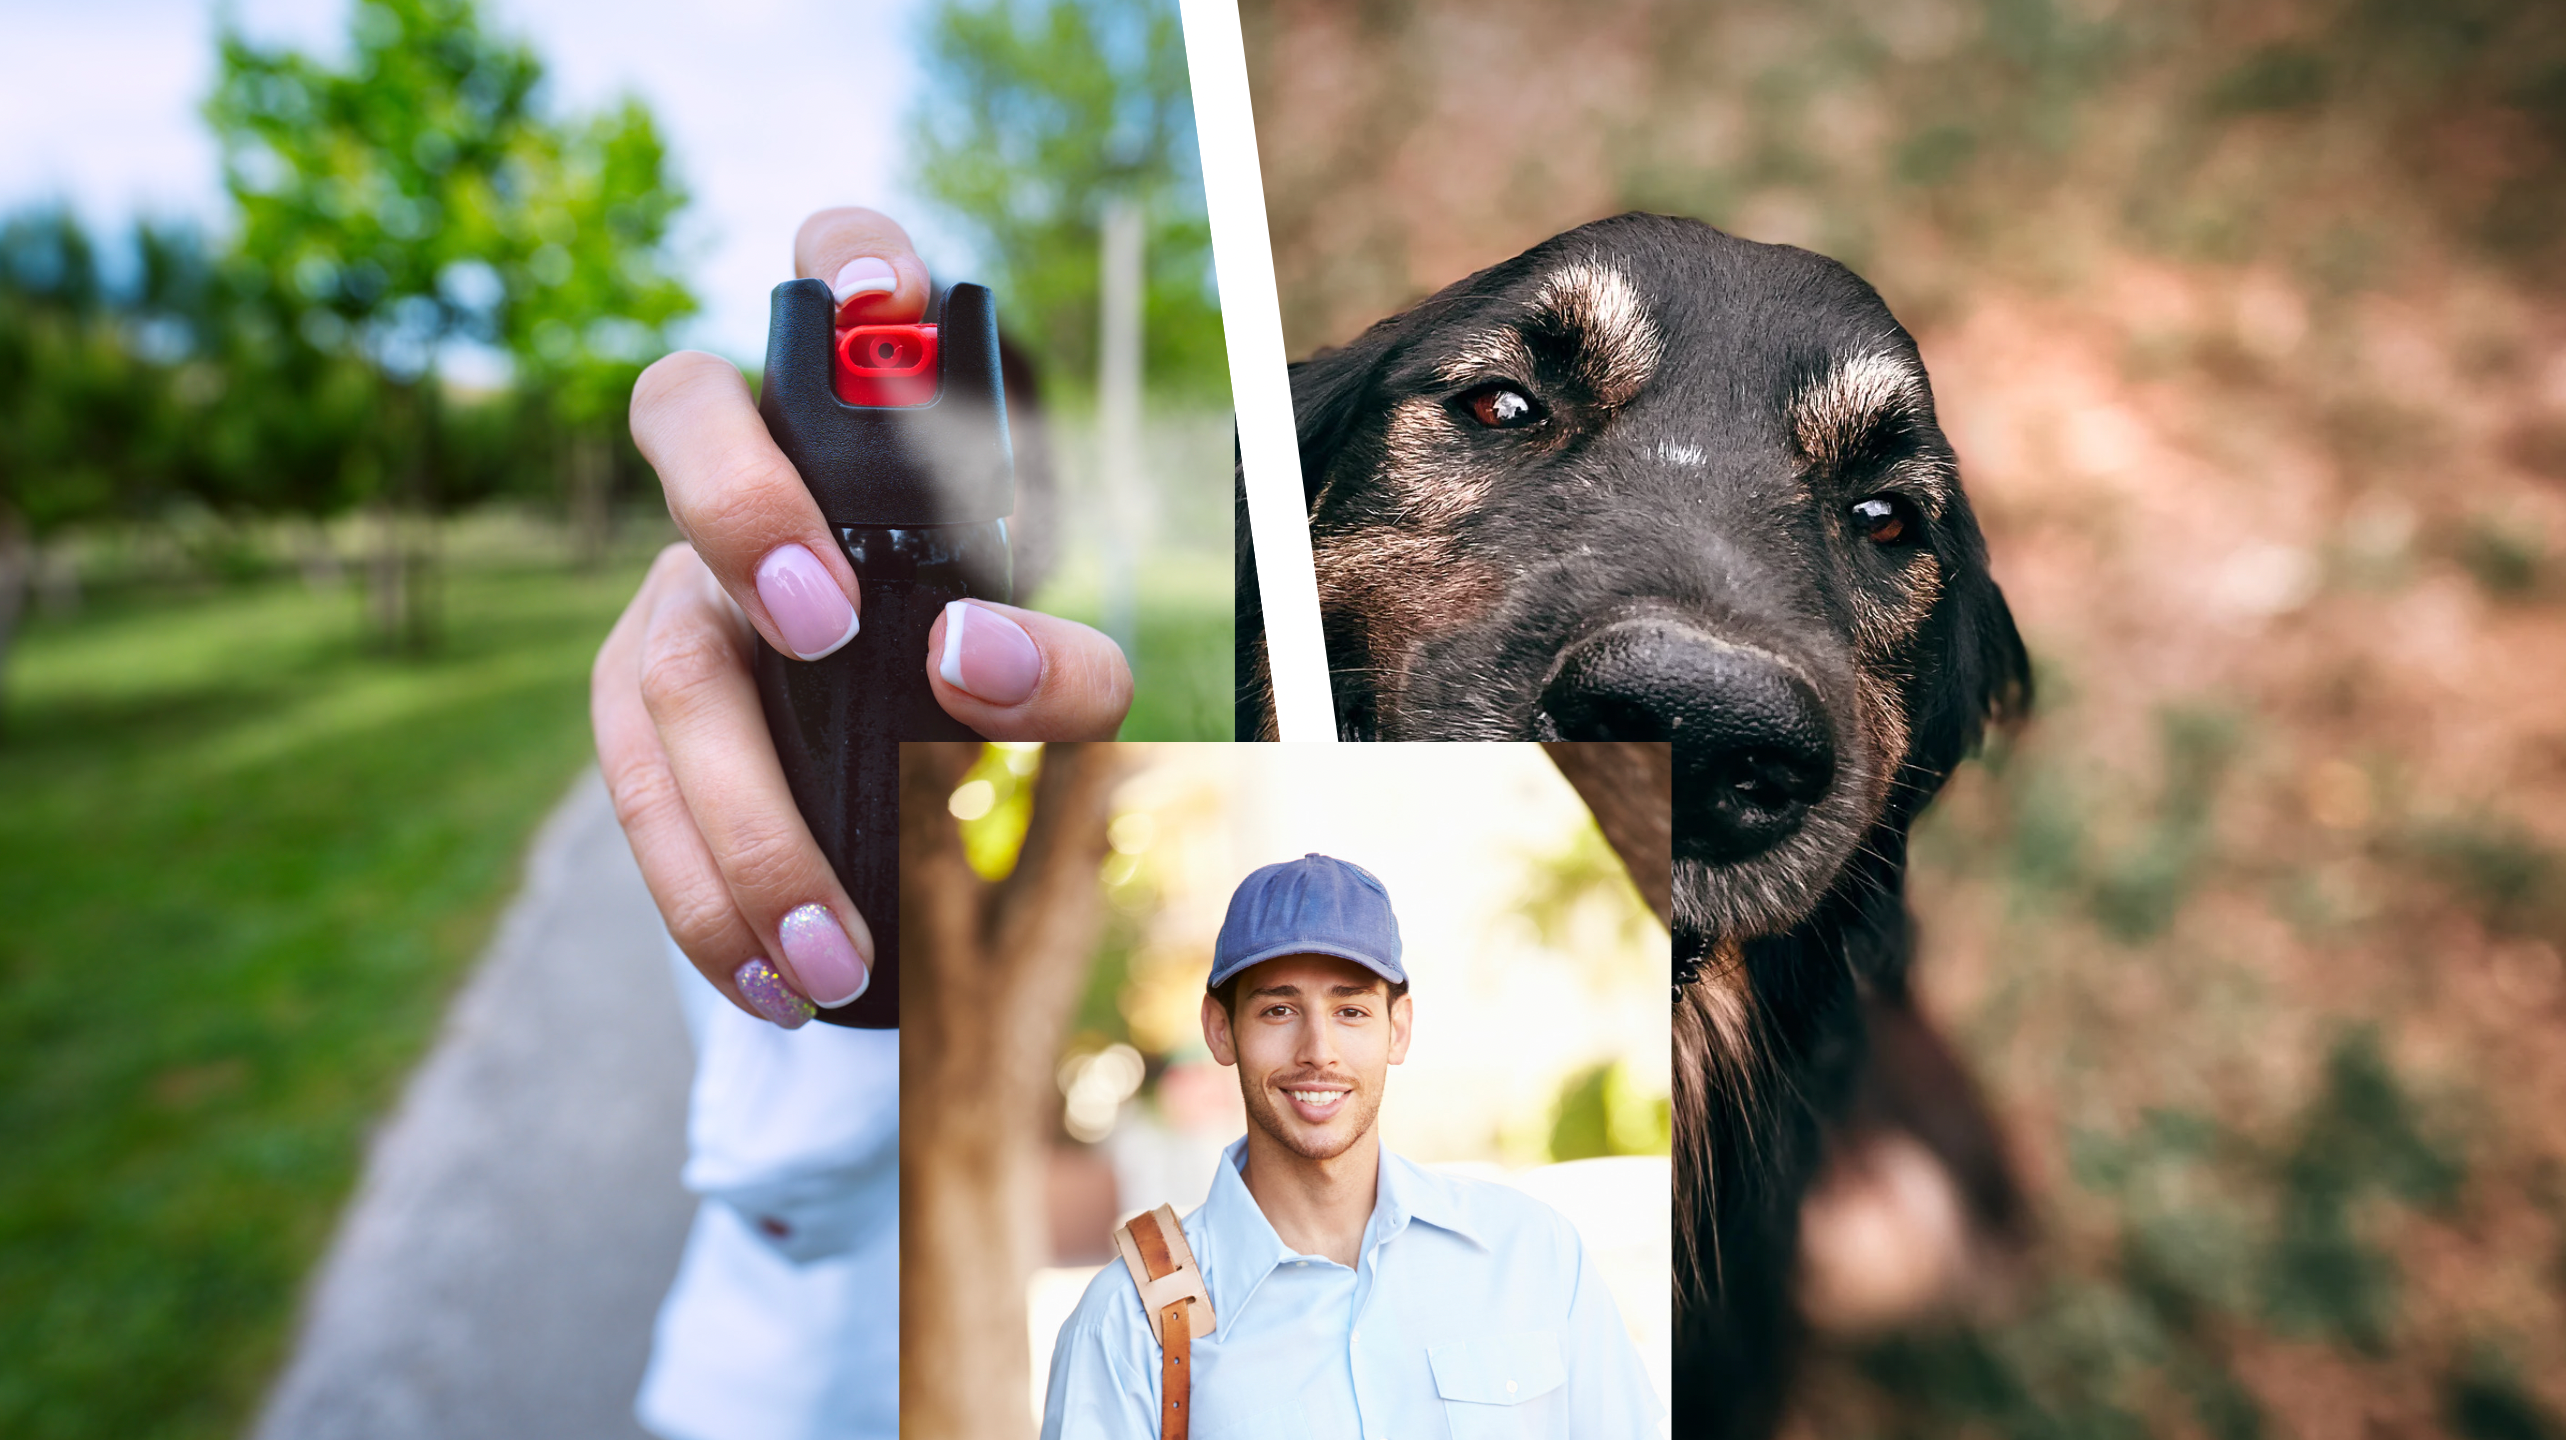 Is It Legal for a Mailman to Pepper Spray a Dog?